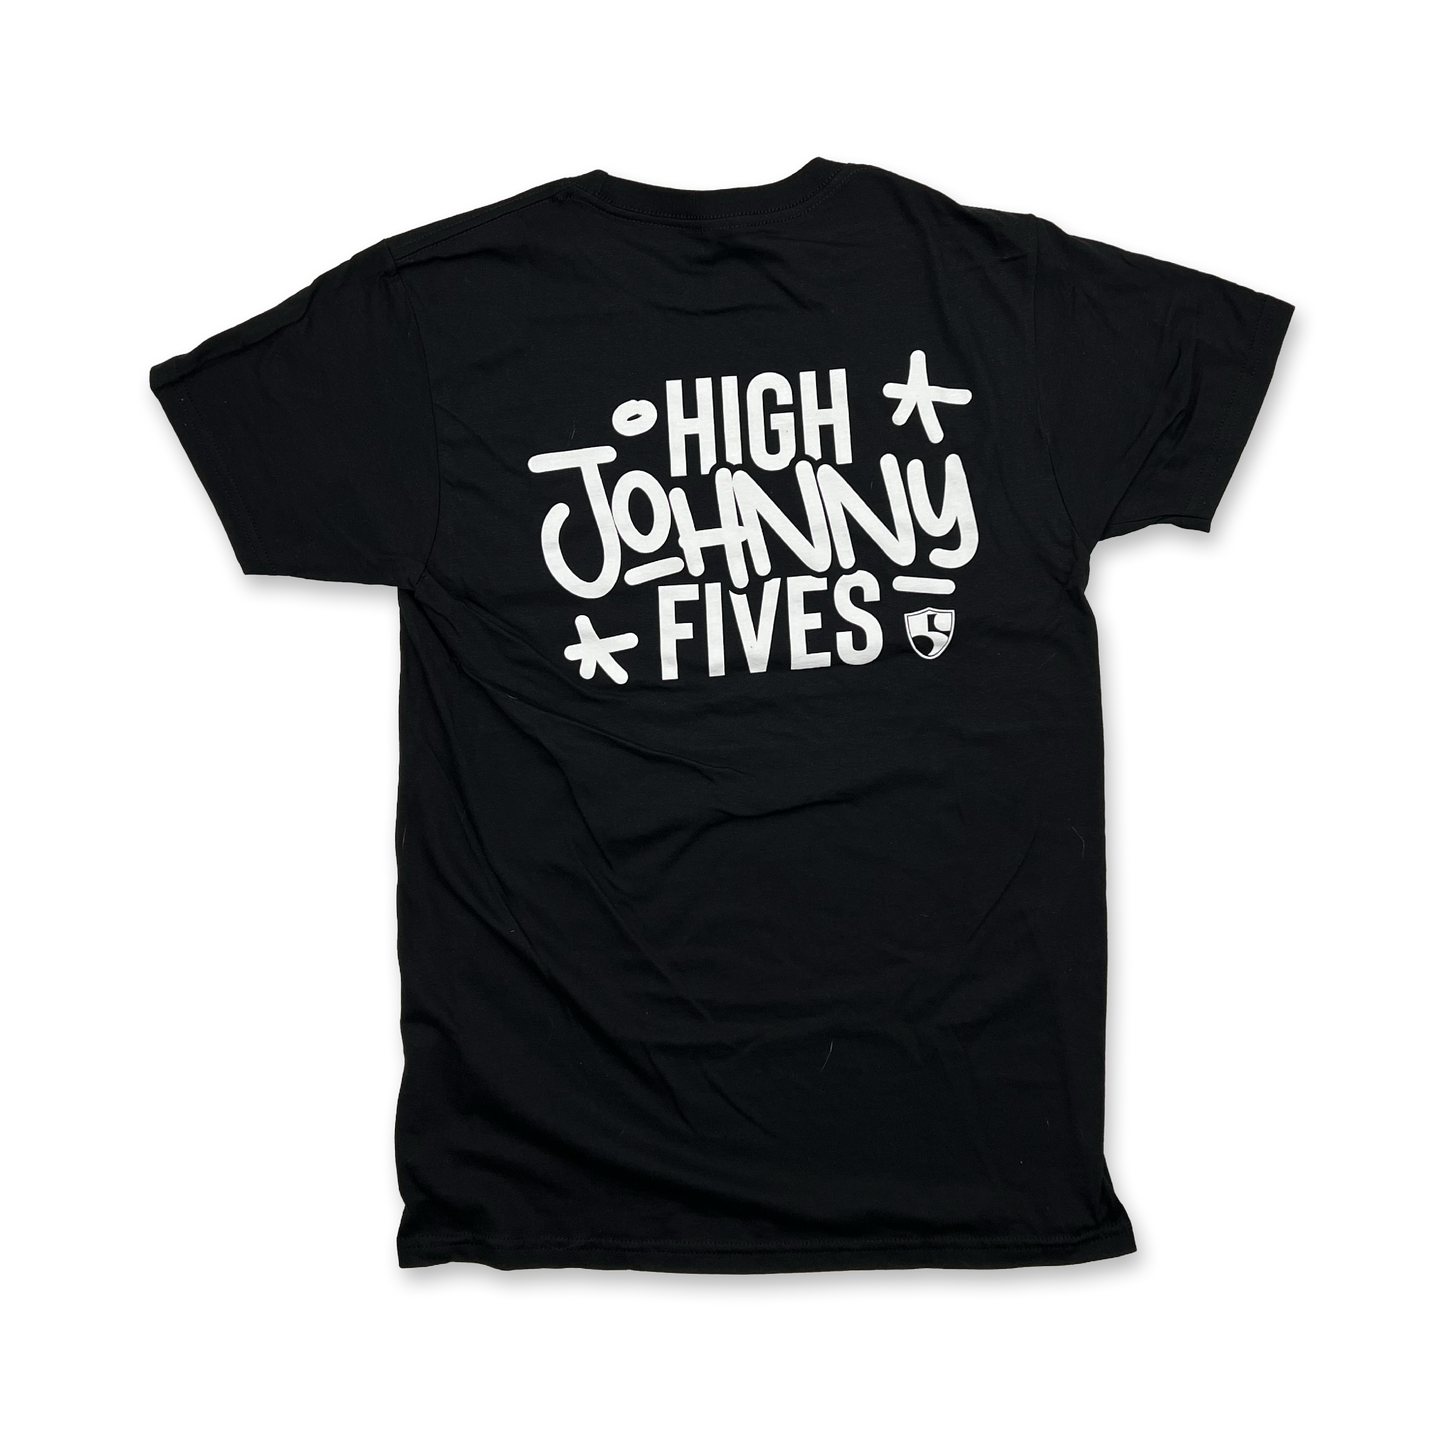 High Fives x Johnny Fives Tee